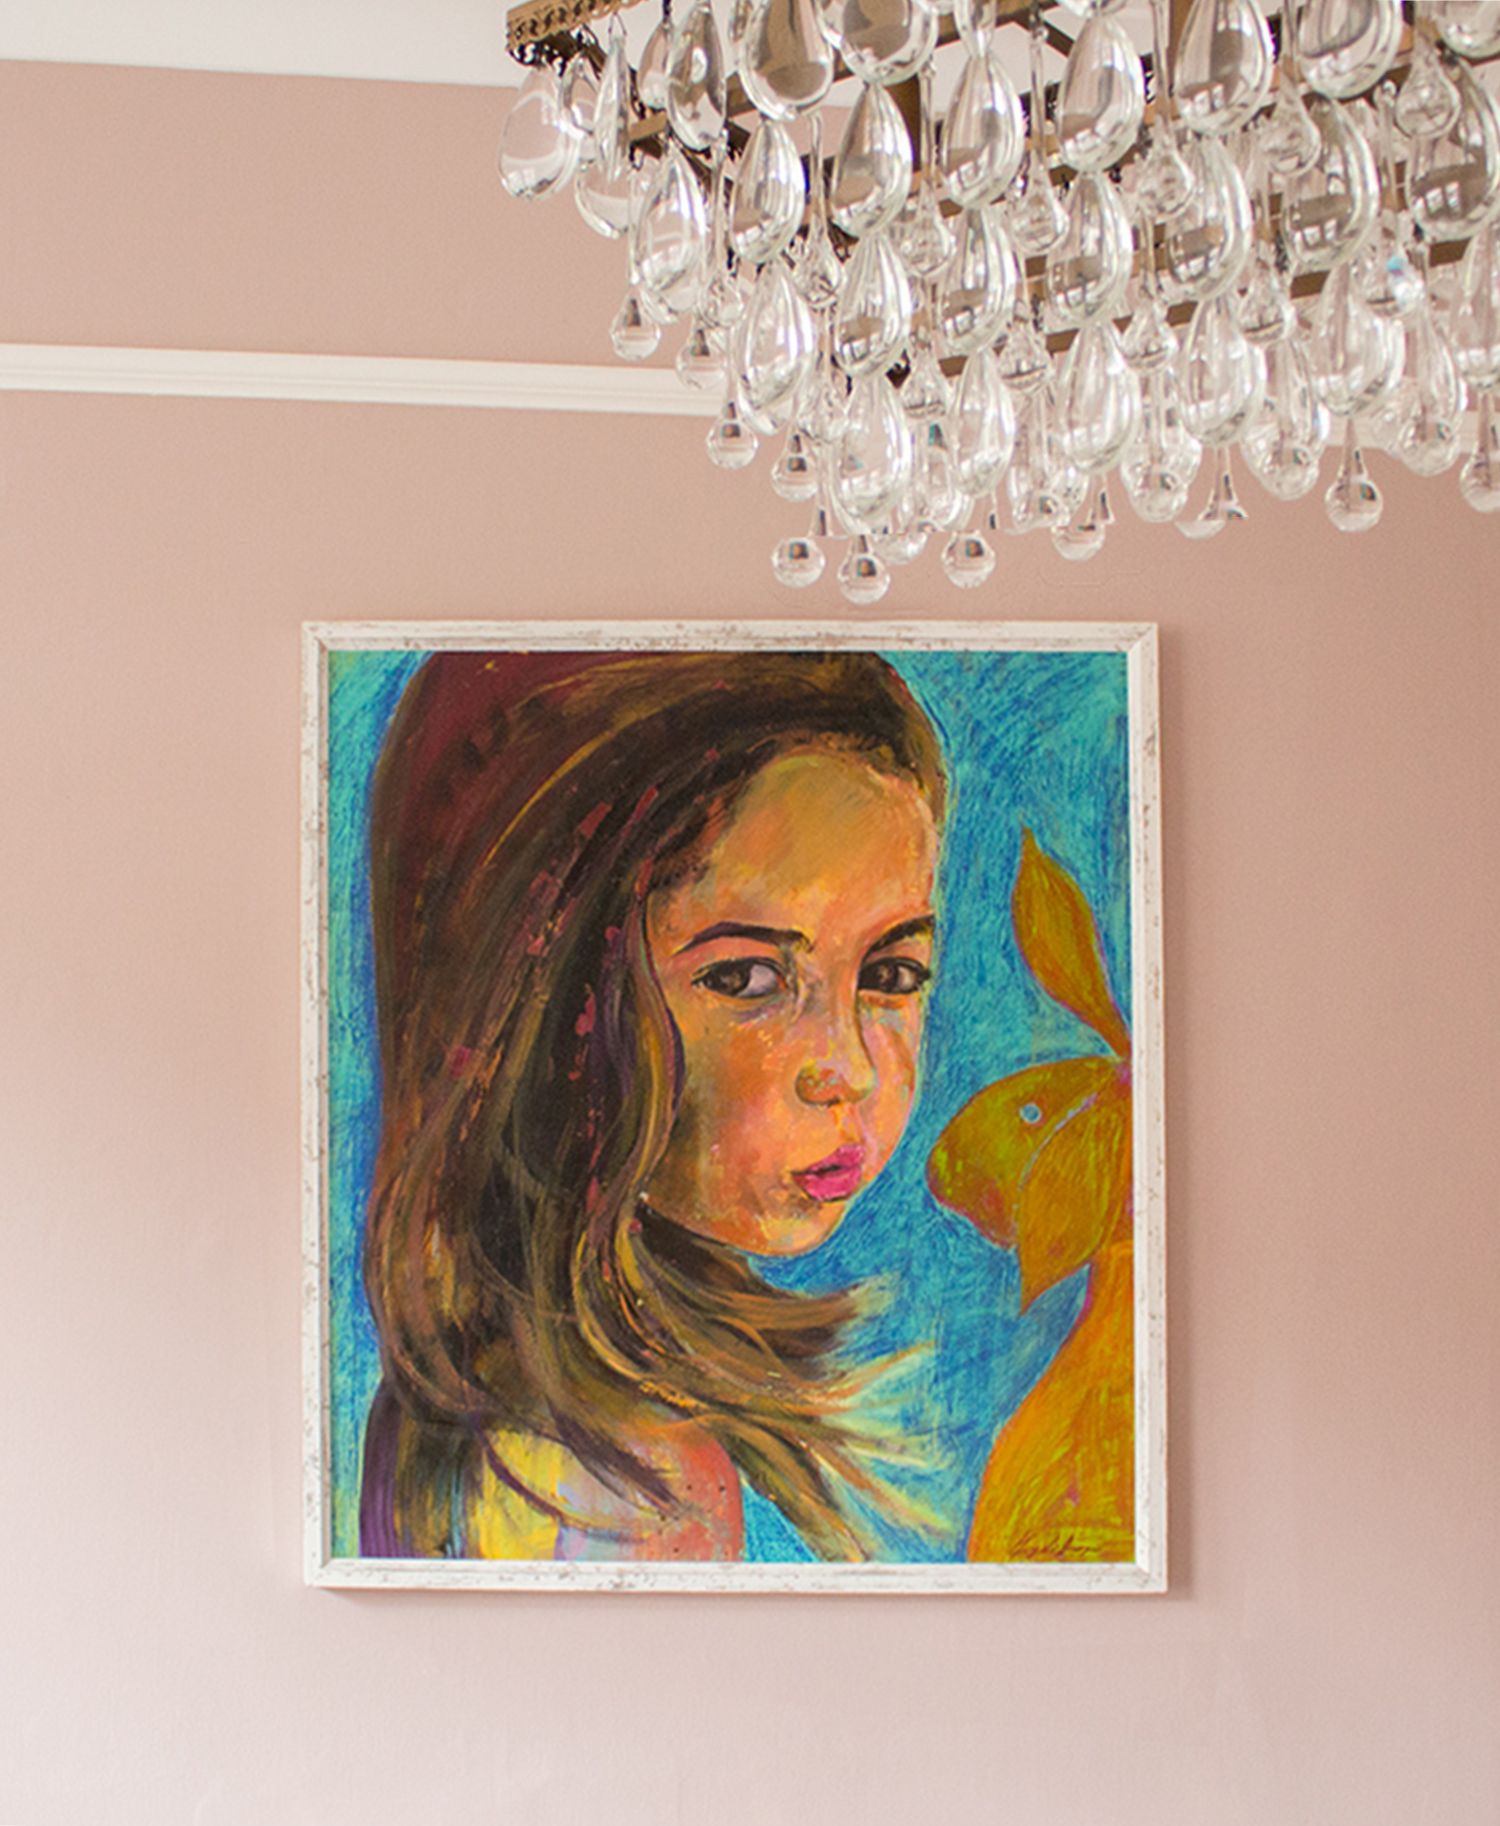 A photo of a piece of artwork of a young girl with a blue background, on pink painted walls.